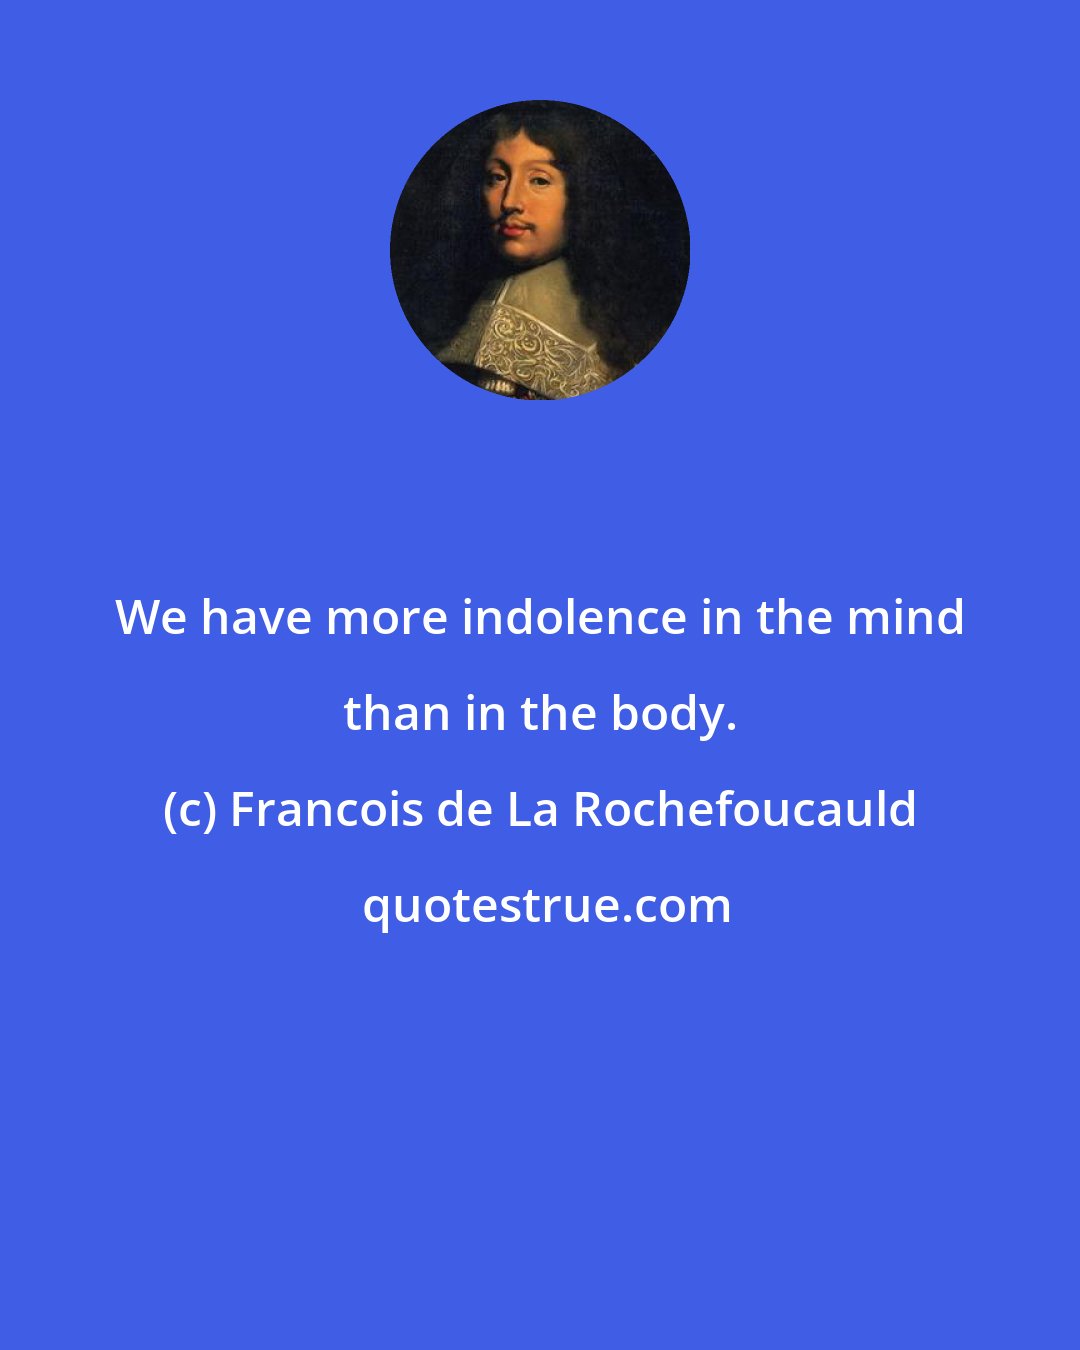 Francois de La Rochefoucauld: We have more indolence in the mind than in the body.